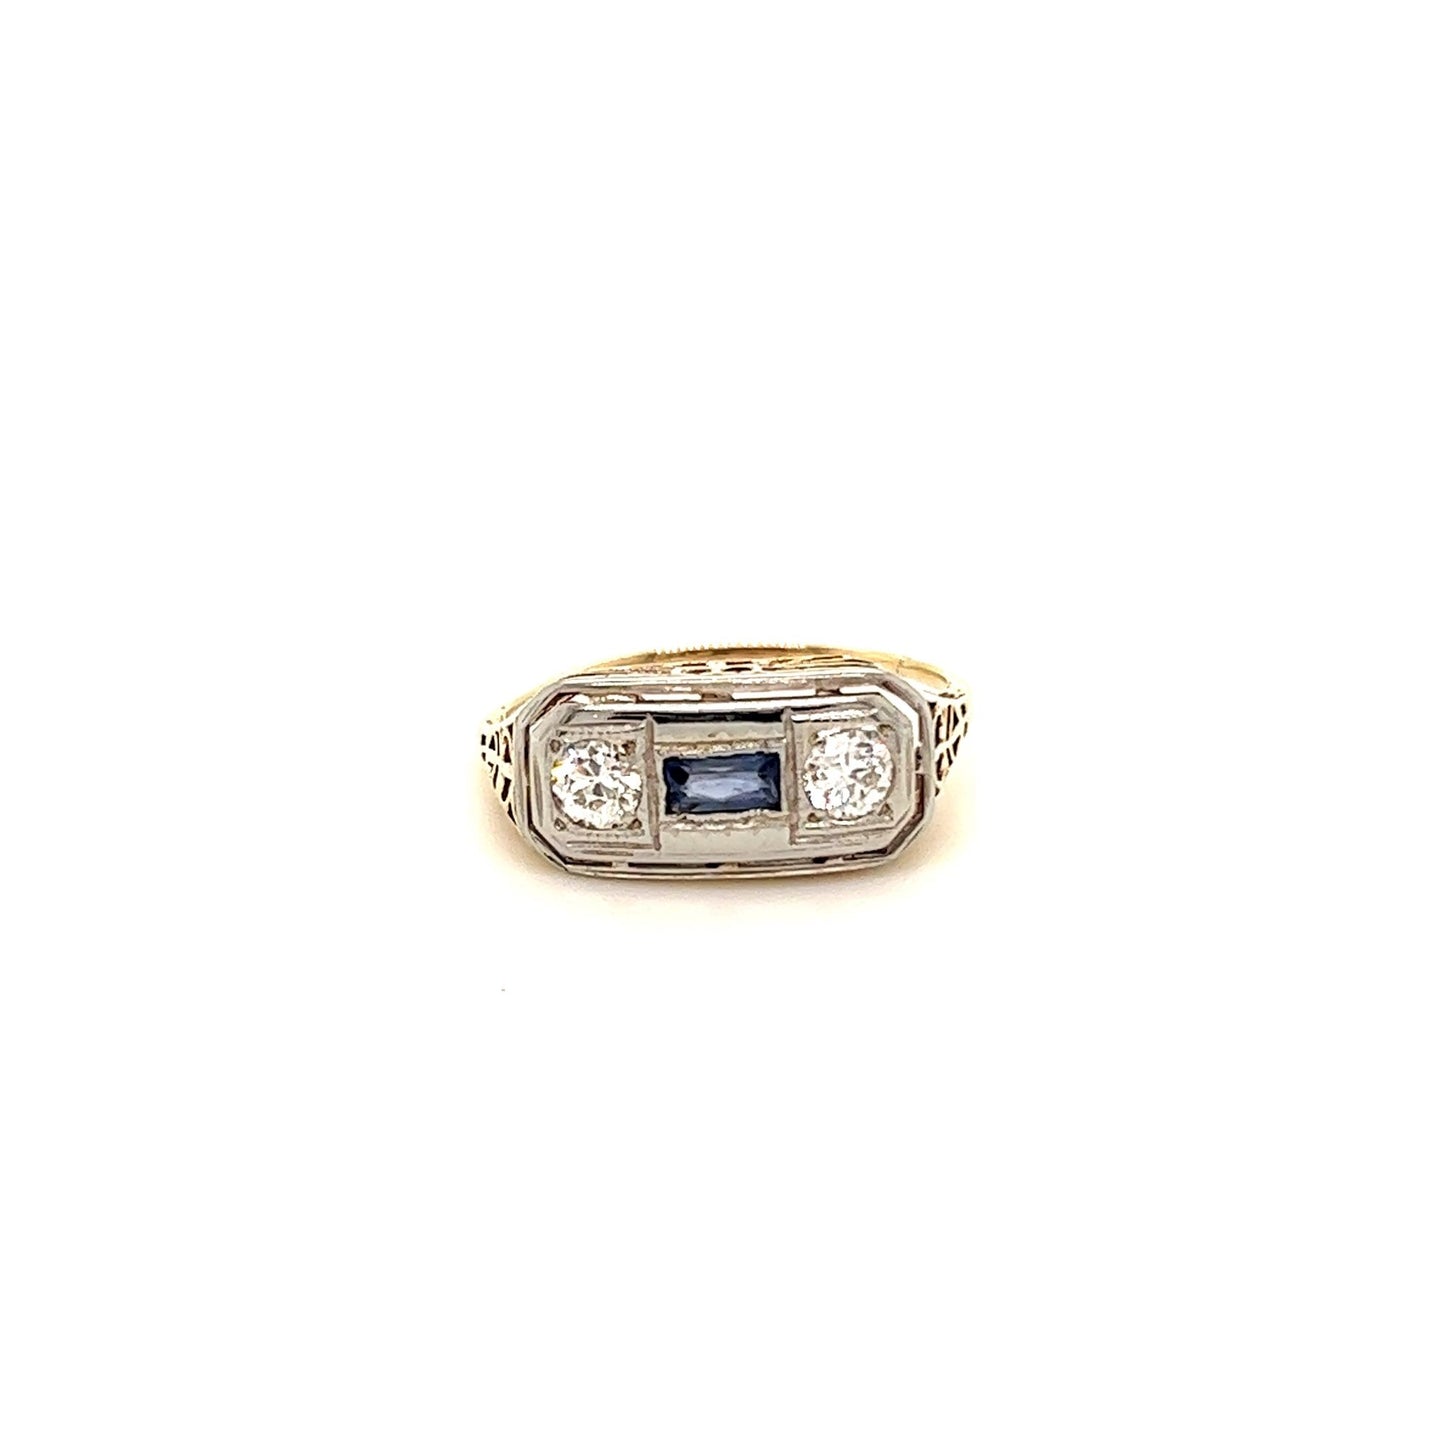 Vintage 14kt Yellow Gold Filagree Ring w/ Round Diamonds & Baguette Cut Sapphire